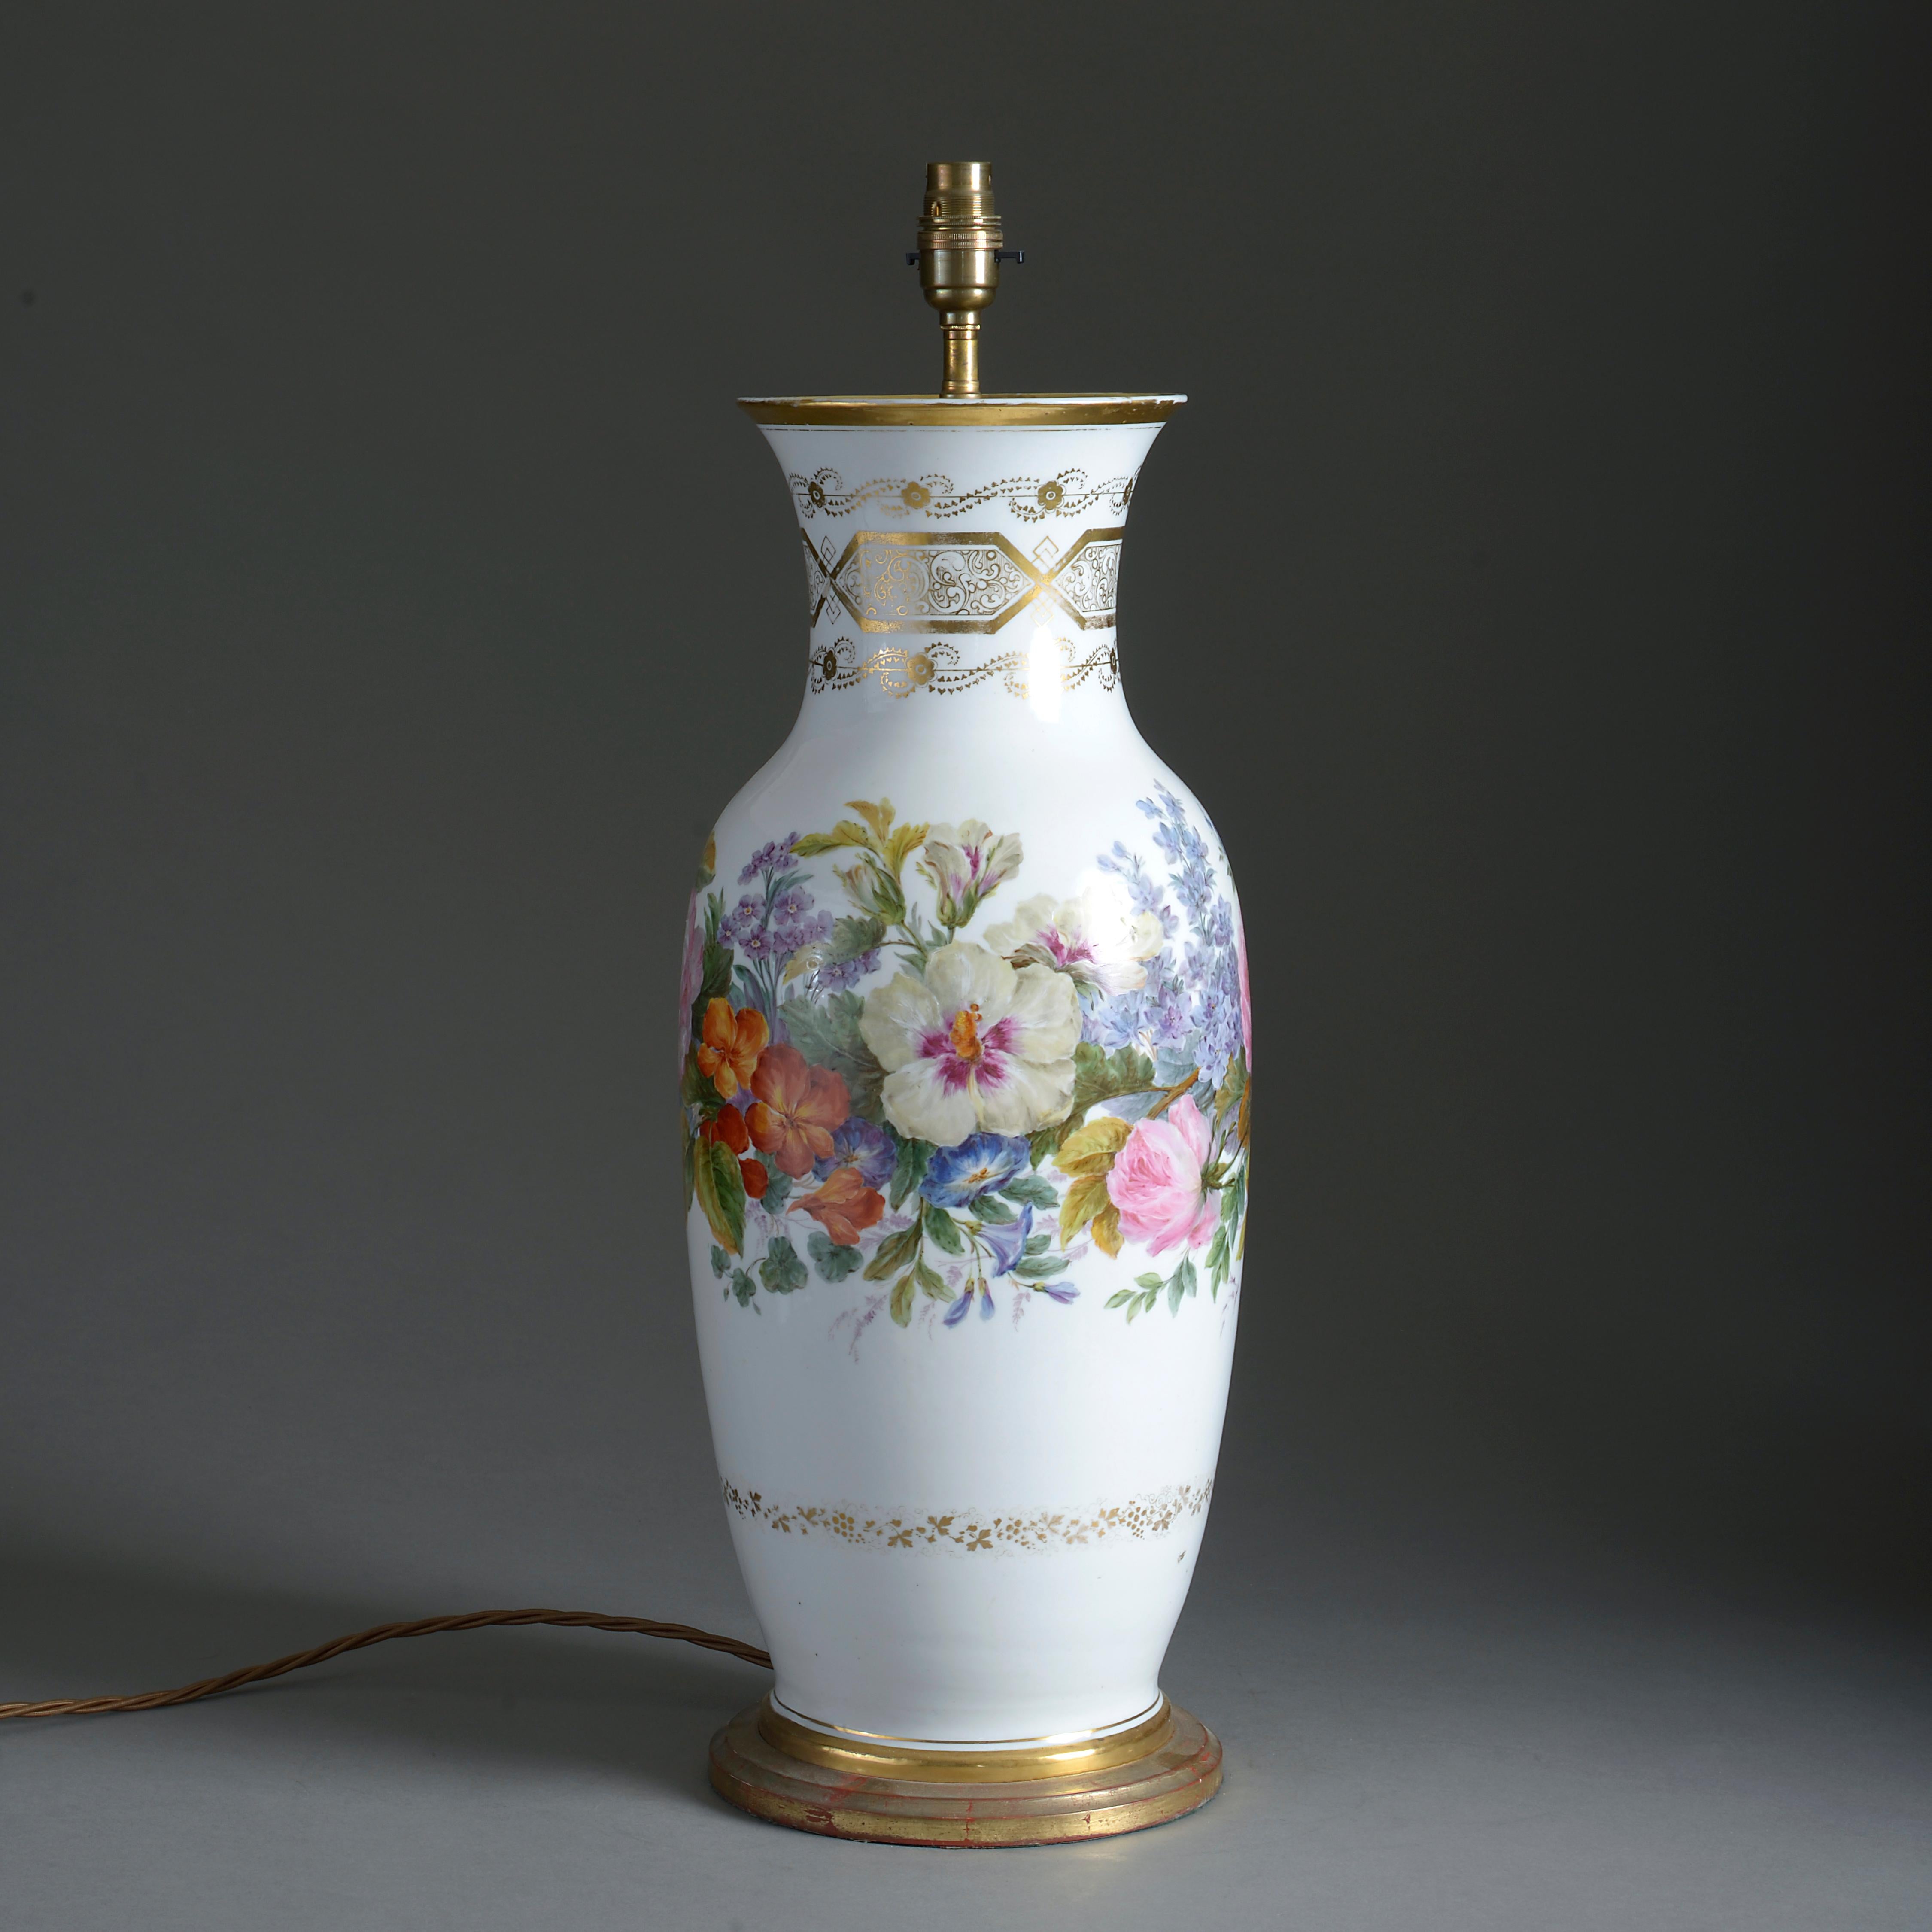 A large mid-19th century porcelain vase, the body decorated with gilt strapwork and a band of floral decoration in polychrome glazes upon a white ground. Raised on a giltwood base and wired as a table lamp.

Height dimension refers to antique